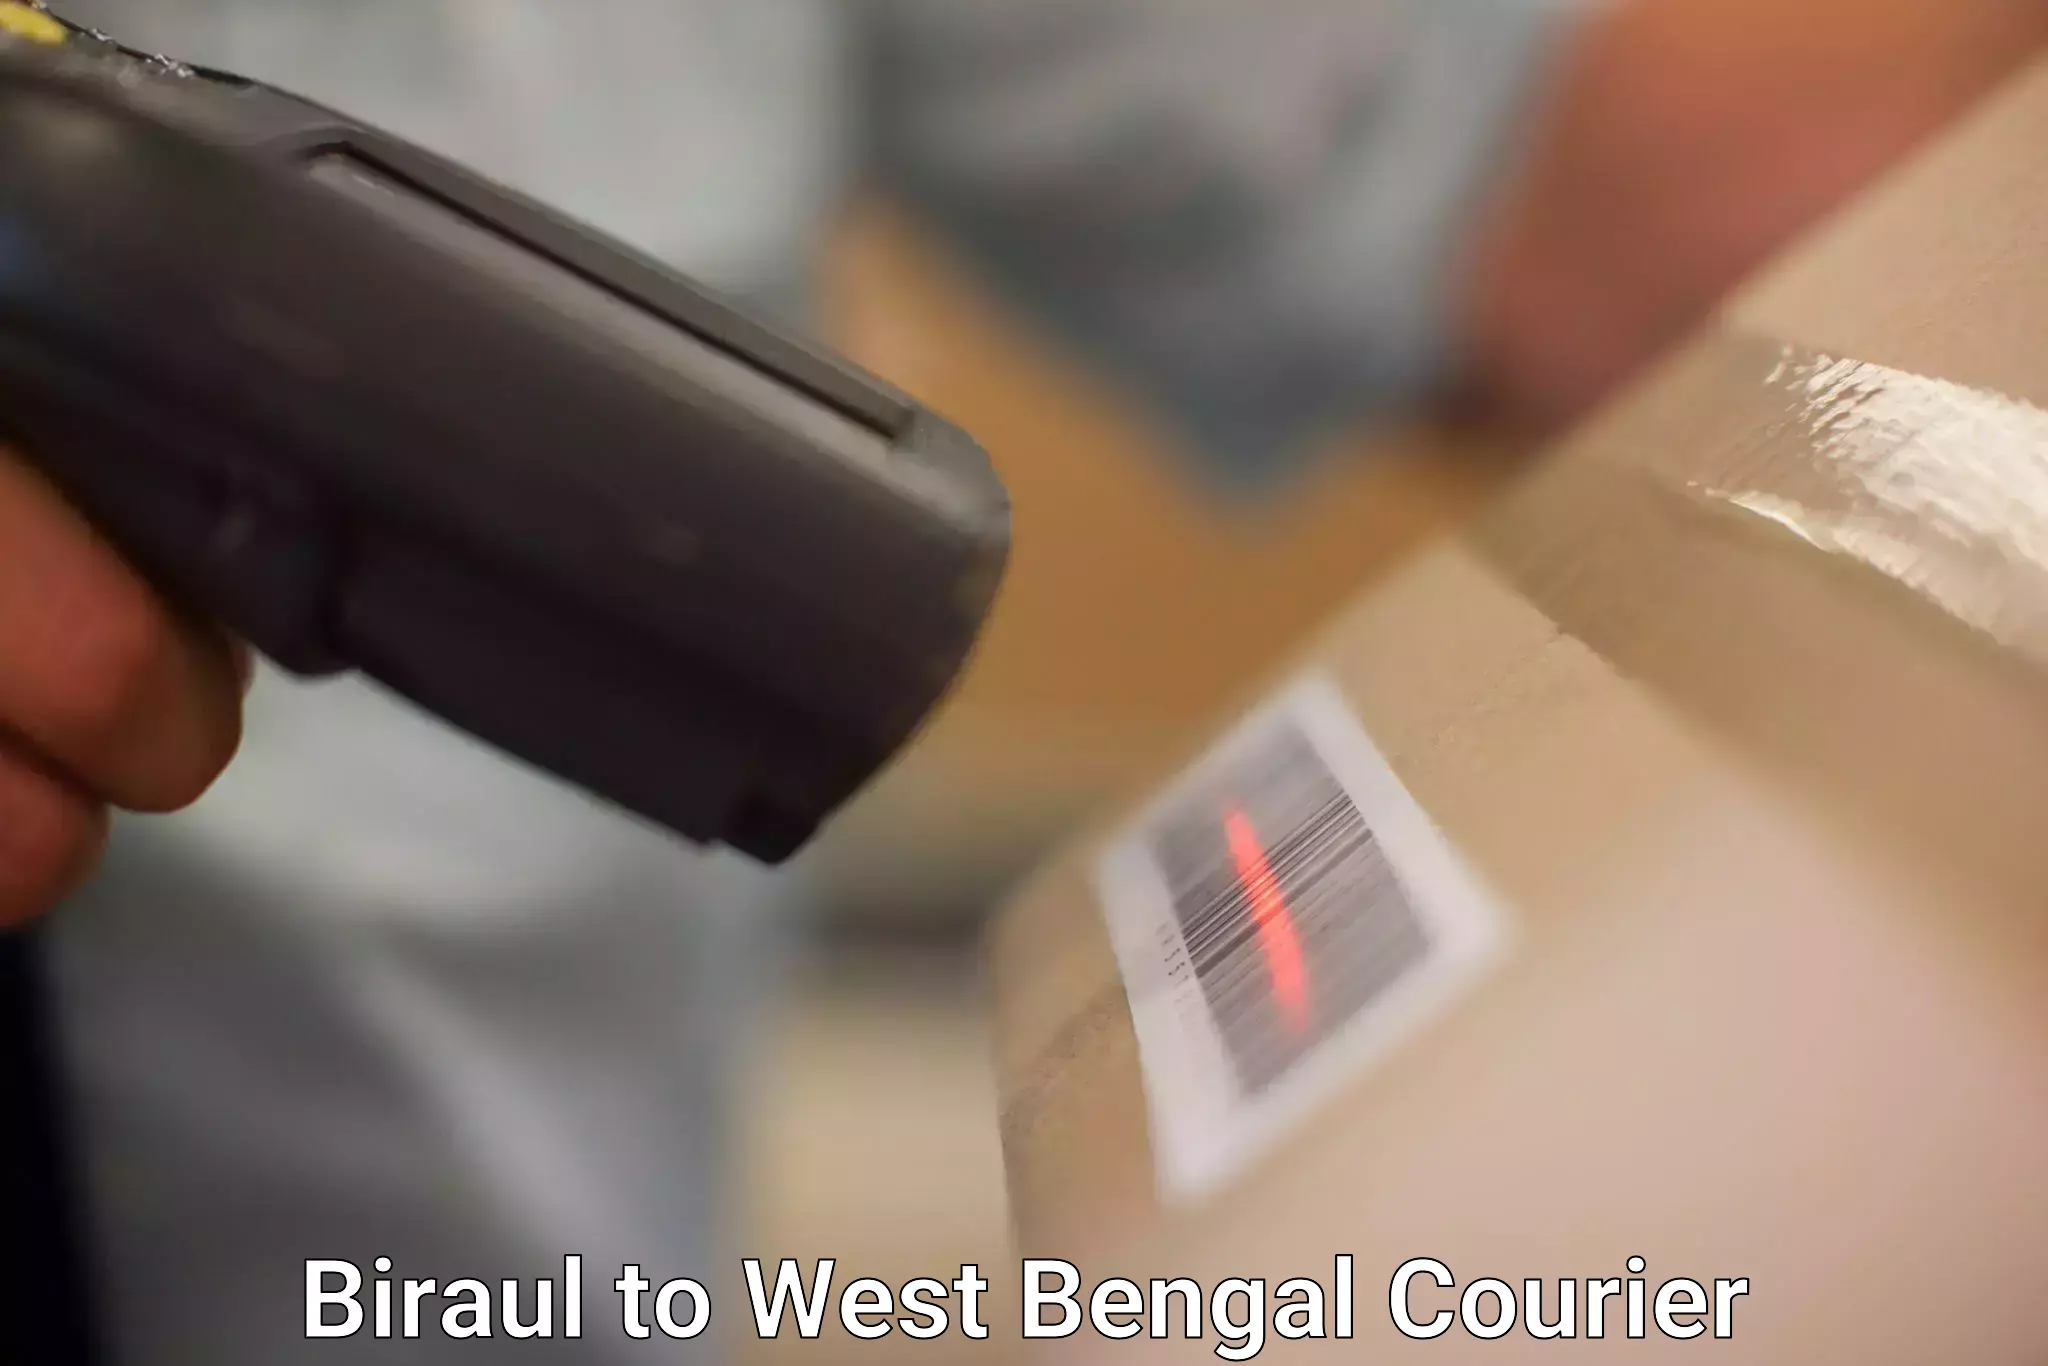 Pharmaceutical courier Biraul to West Bengal